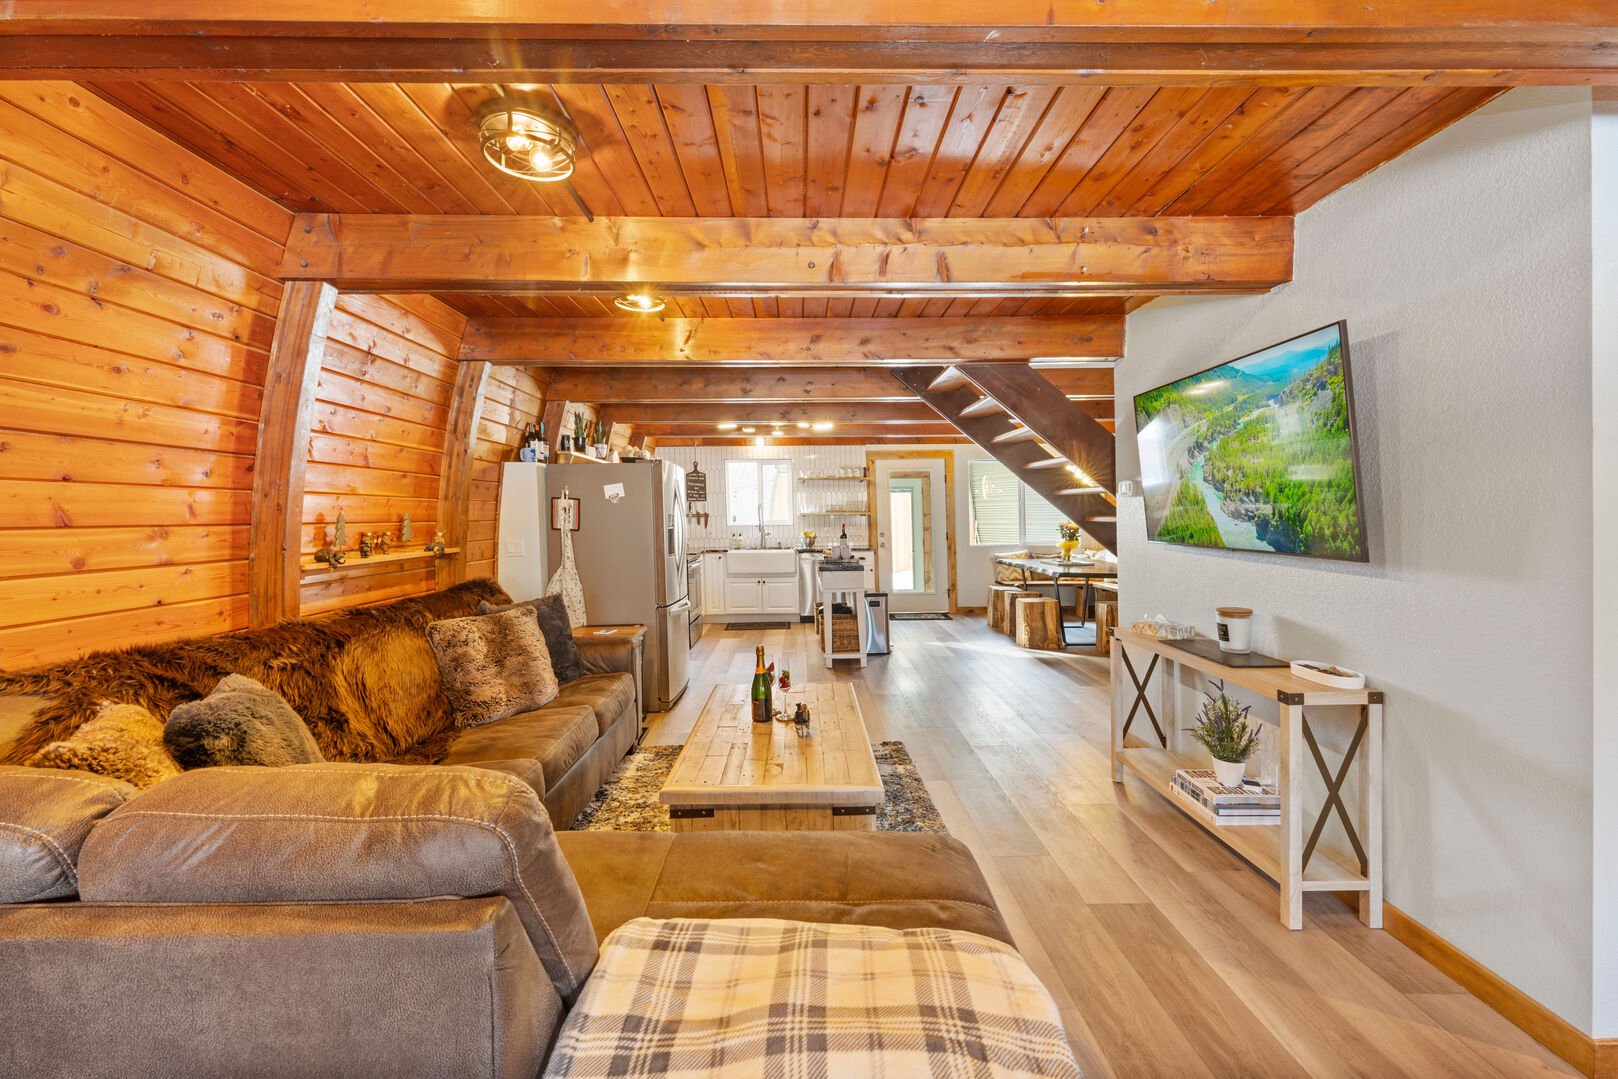 View our family-friendly cabins near Whitefish, Montana